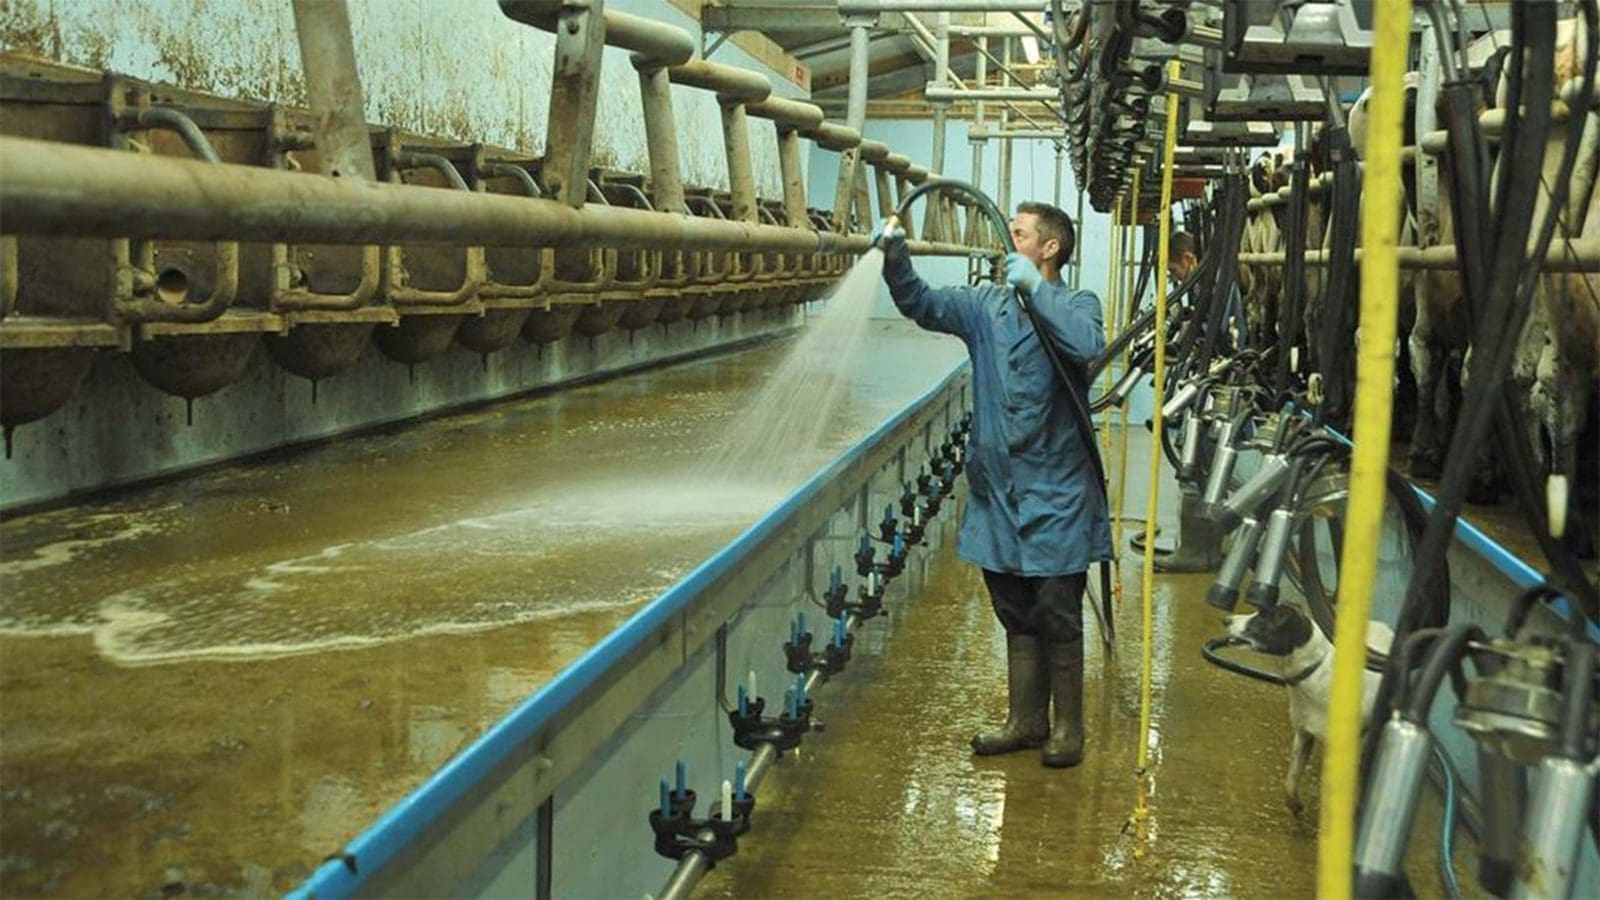 FAO, WHO publish guidance on reuse of fit-for-purpose water in dairy industry